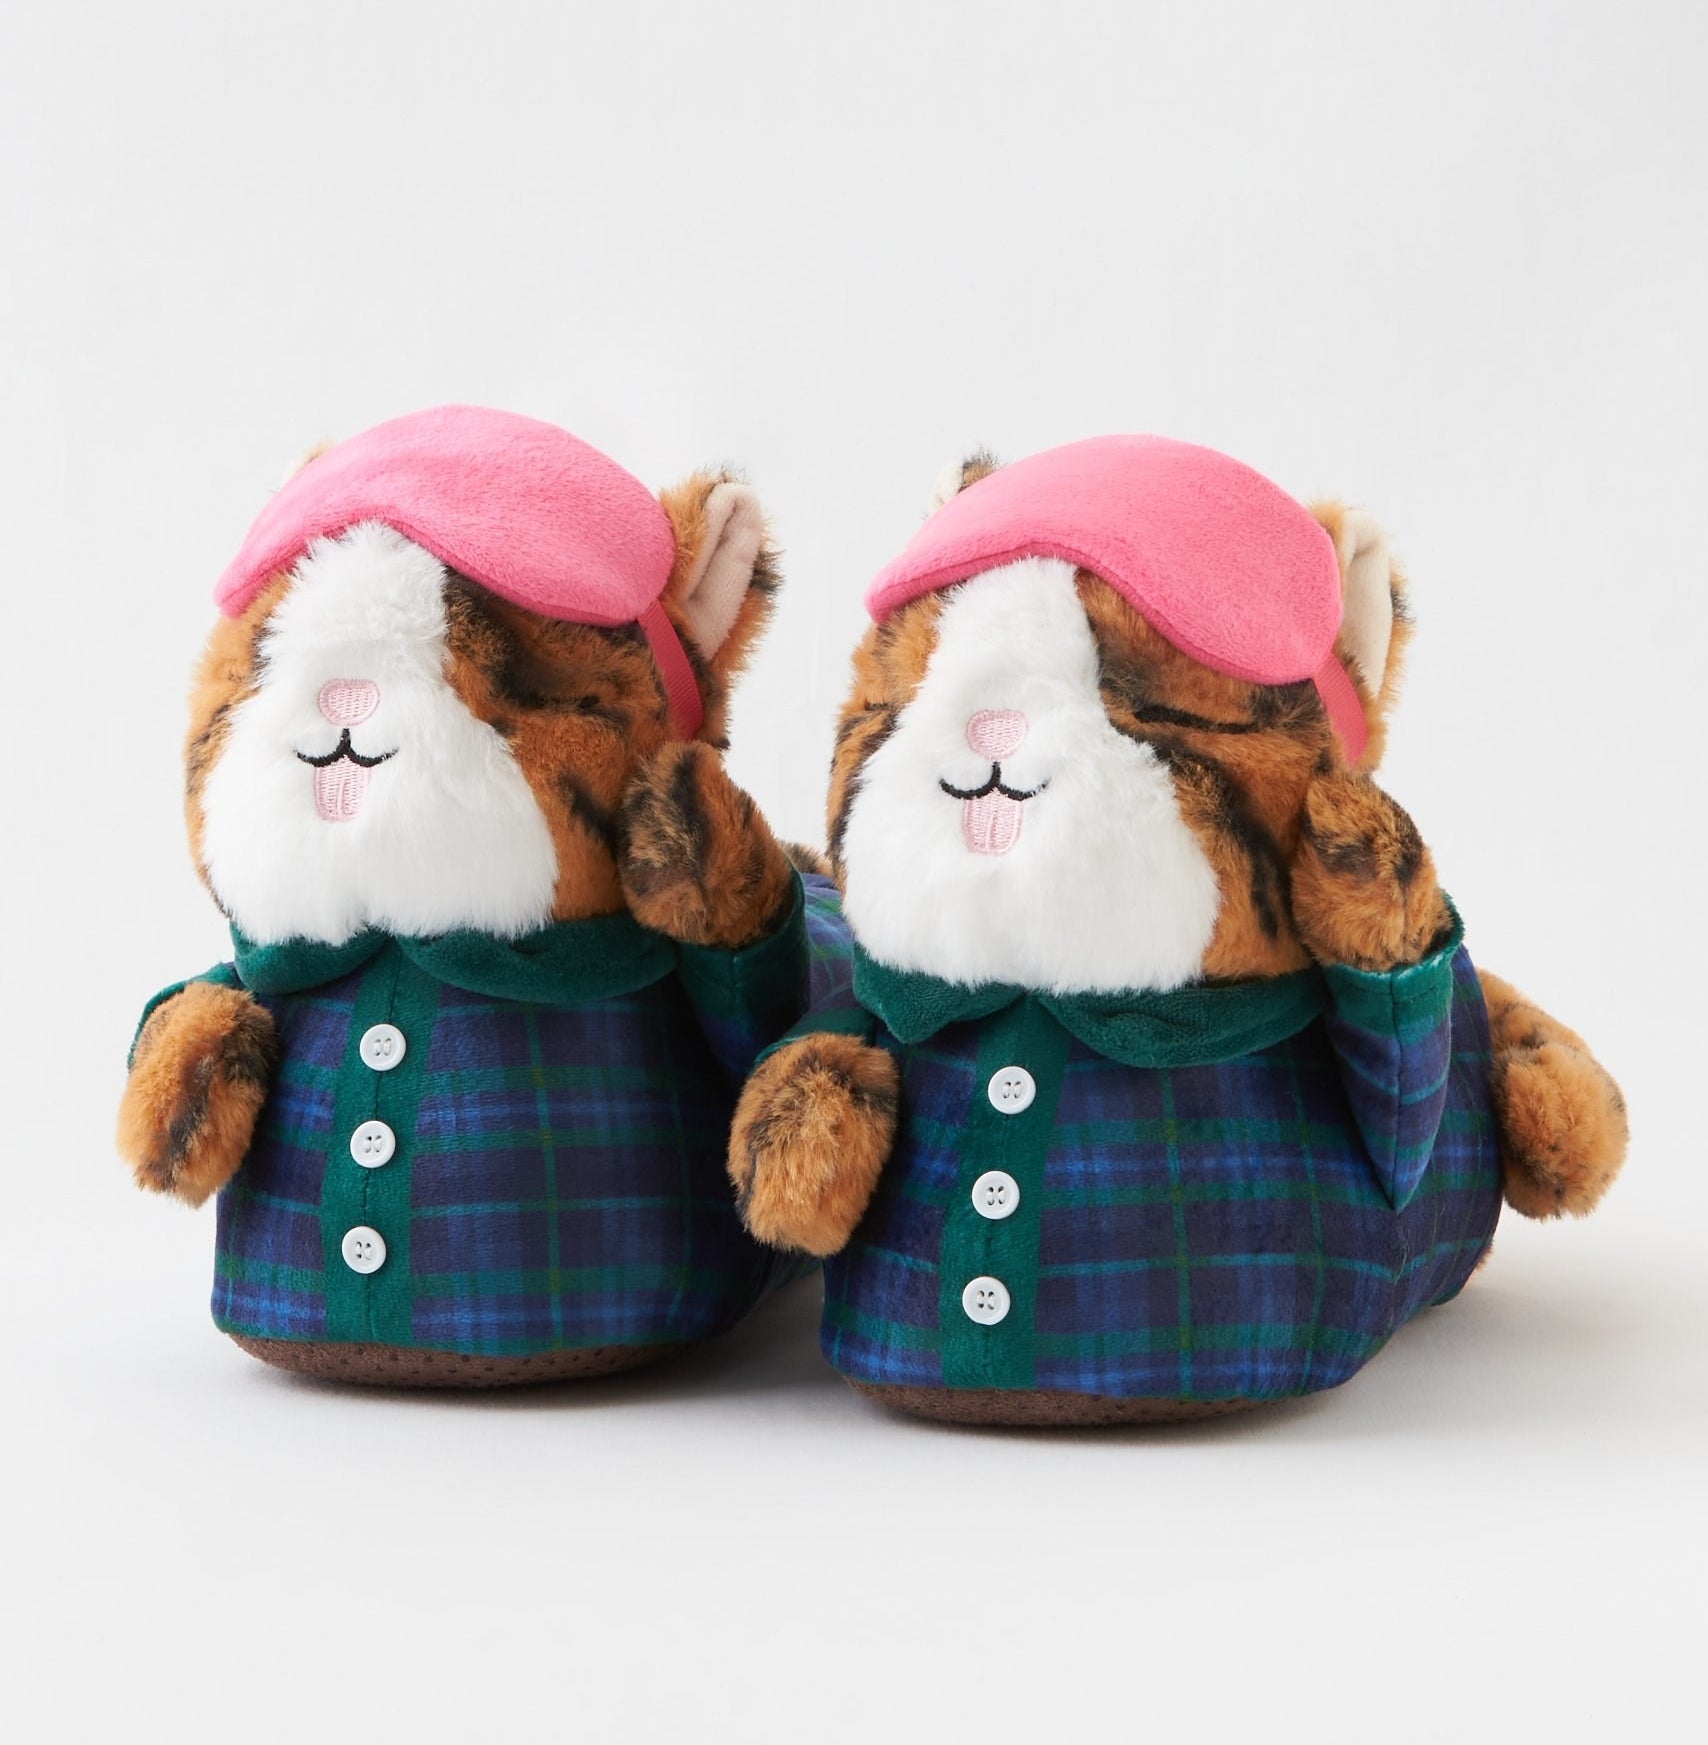 slippers whose toes are fuzzy animals wearing plaid pjs and pink sleep masks